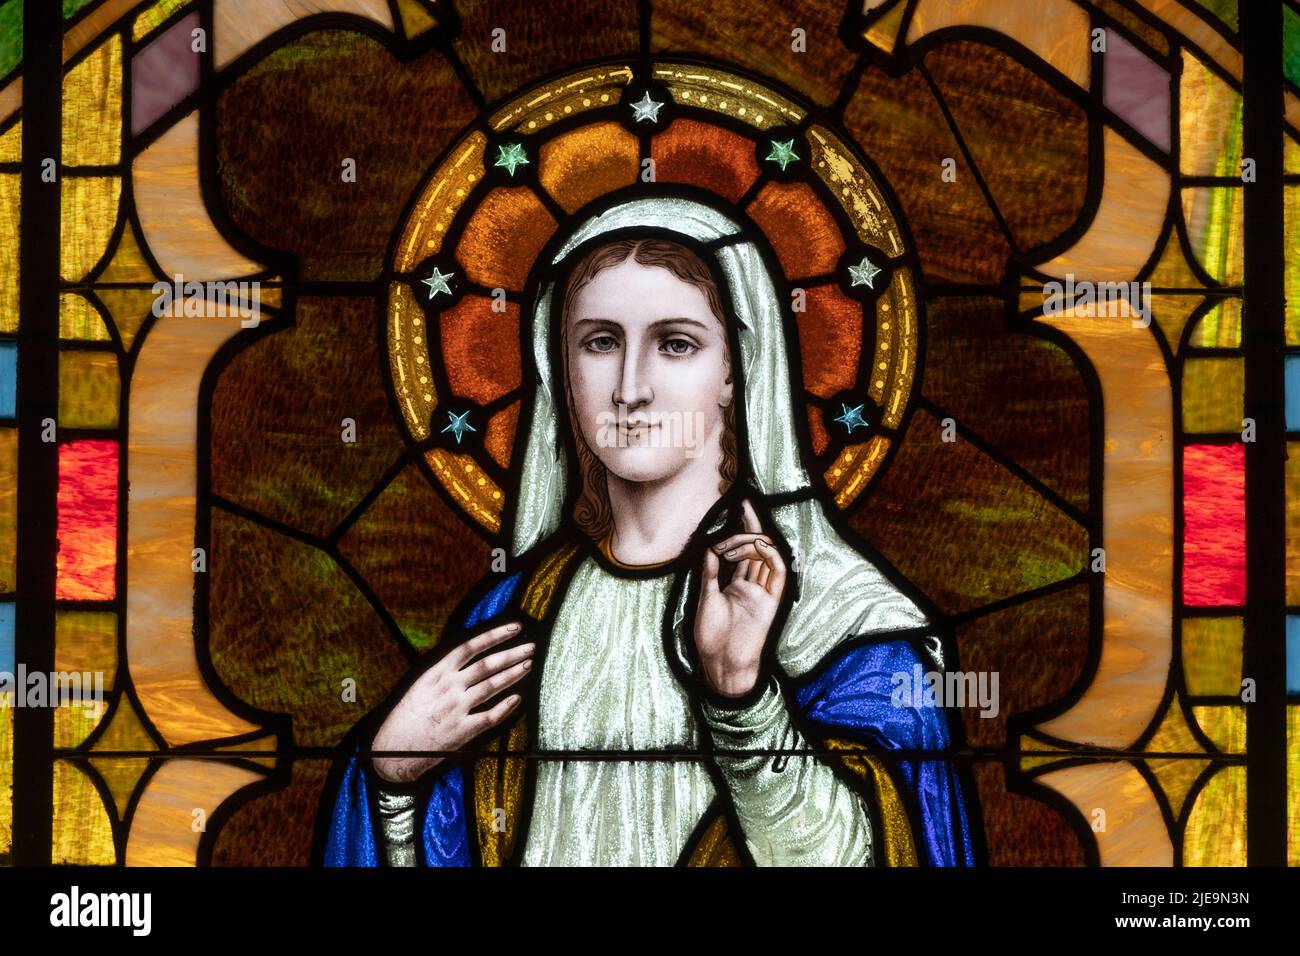 Cincinnati - Circa June 2022: Depiction of Mary, mother of Jesus Christ in stained glass at a church. Stock Photo